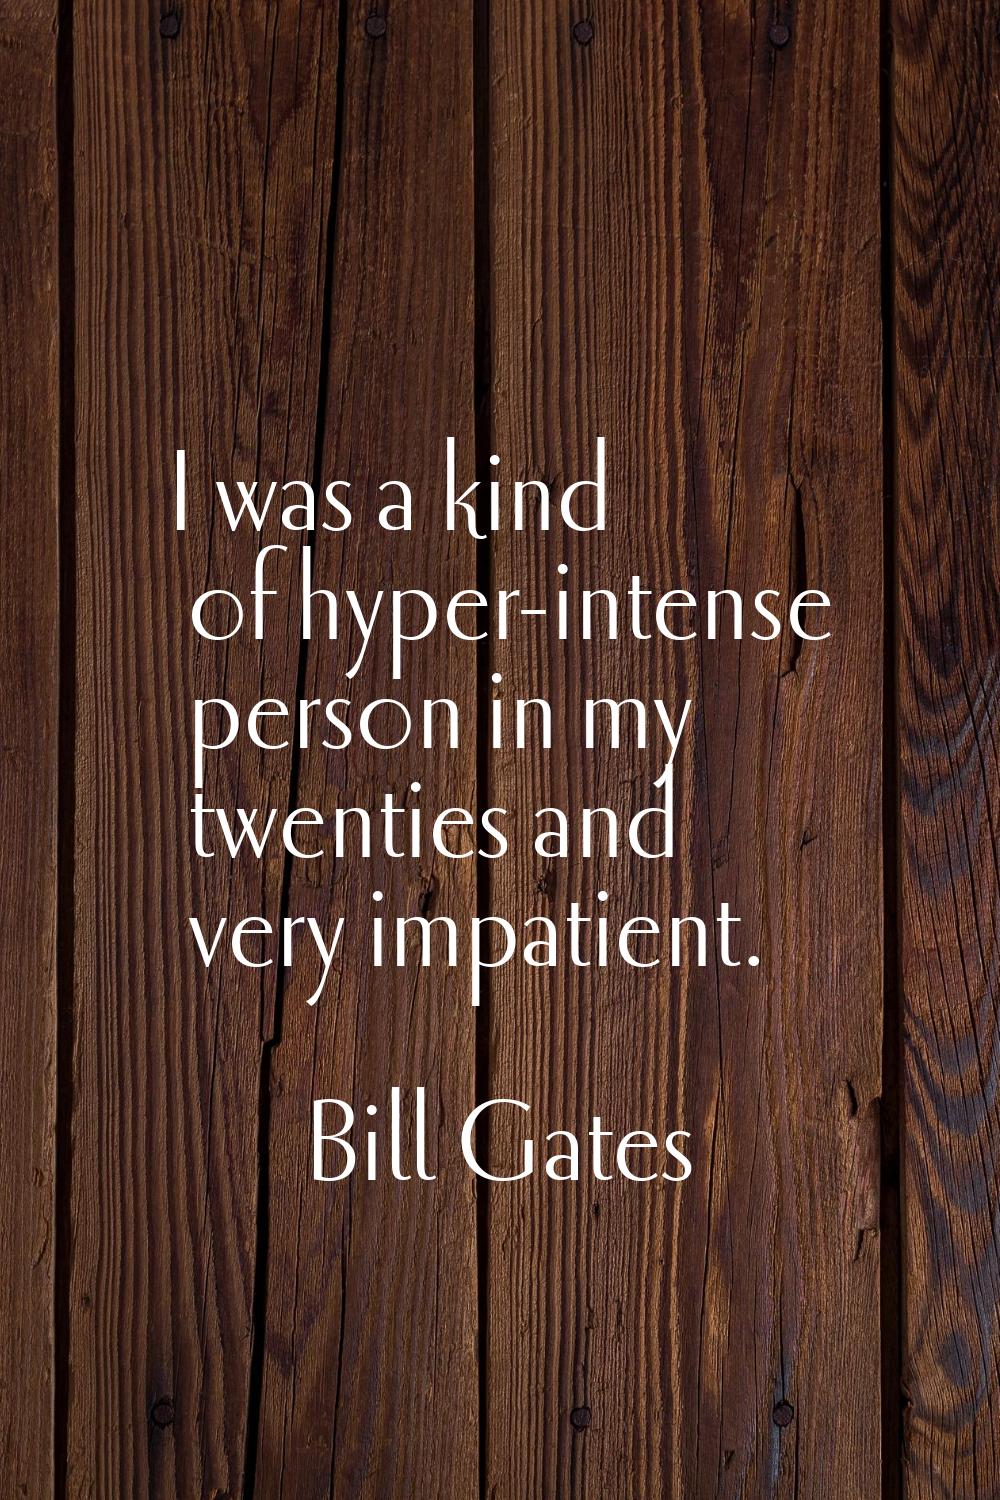 I was a kind of hyper-intense person in my twenties and very impatient.